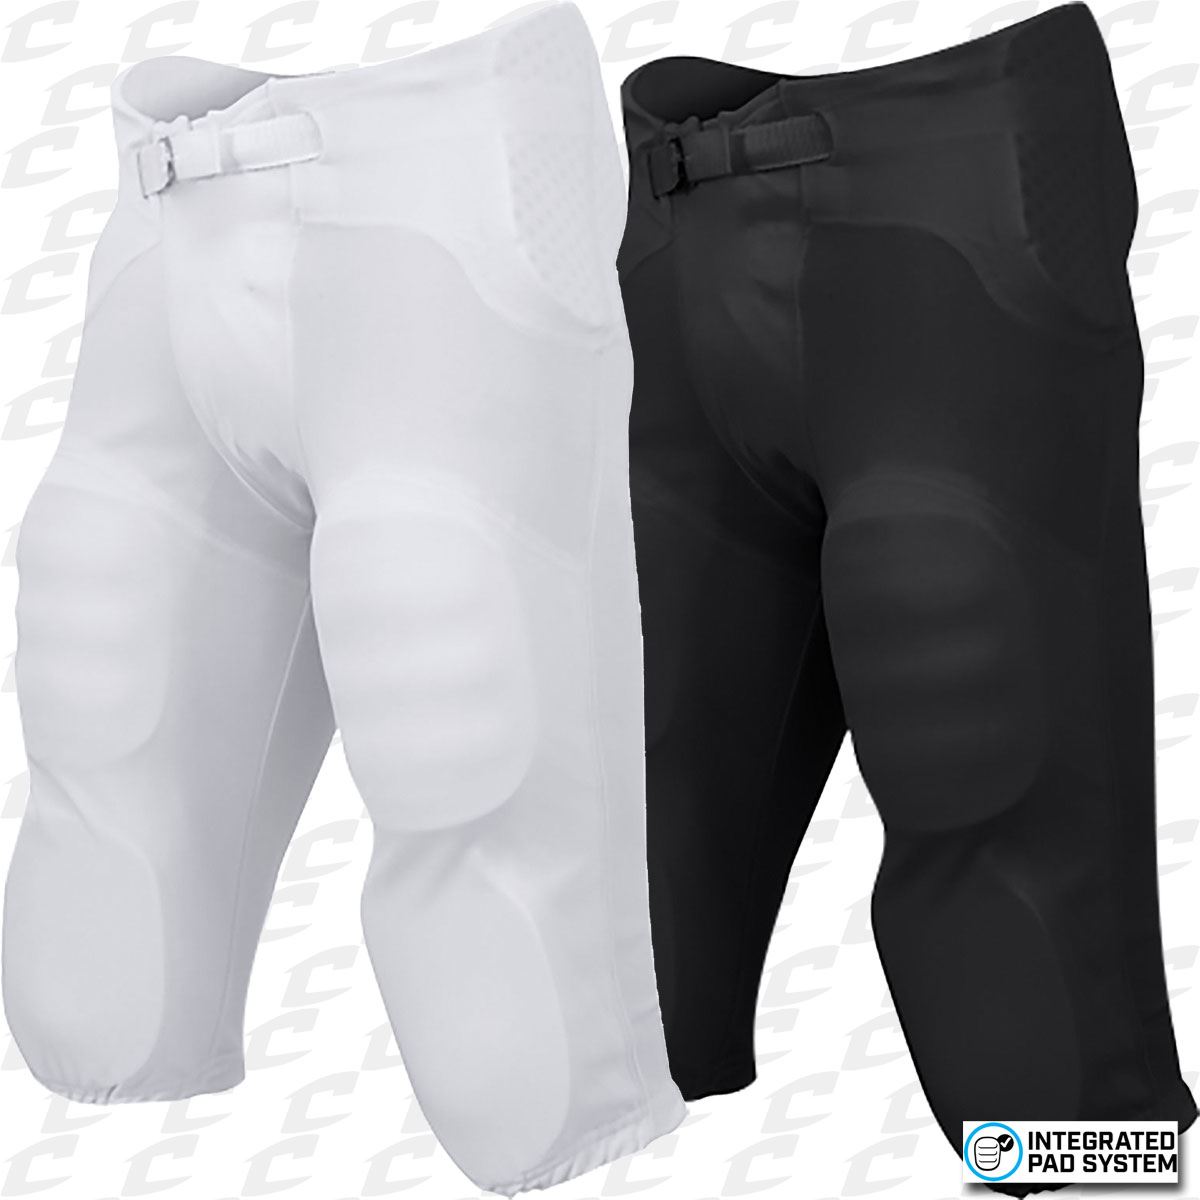 White Youth or Adult Champro Football Pants with Integrated Built In Pads Black 